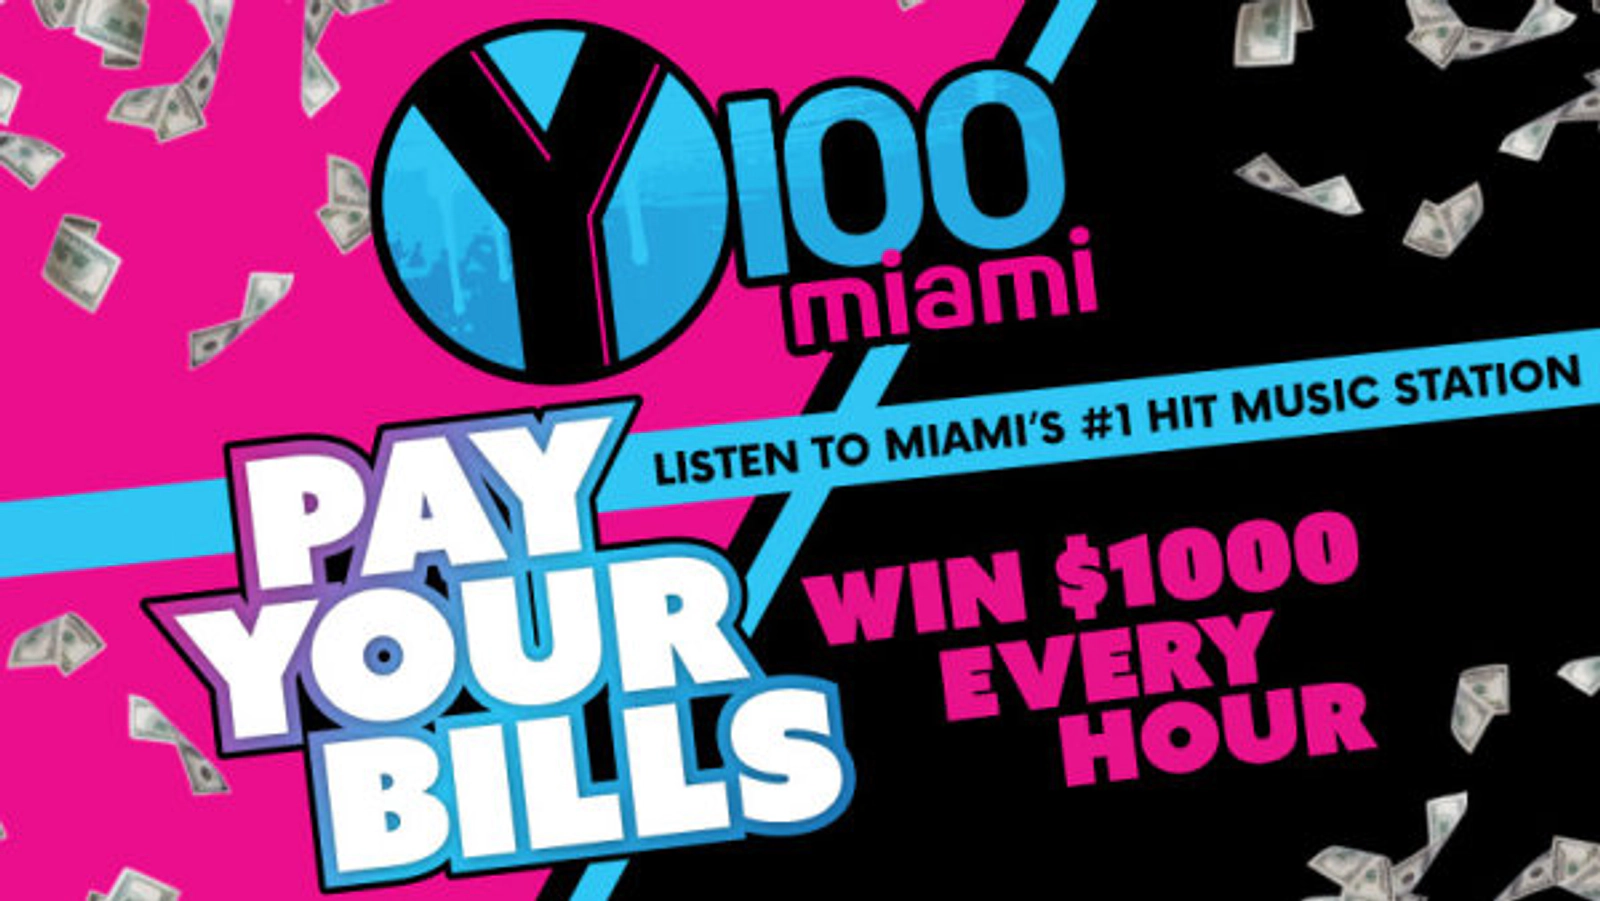 Listen to Win $1,000 Every Hour on Y100! - Thumbnail Image